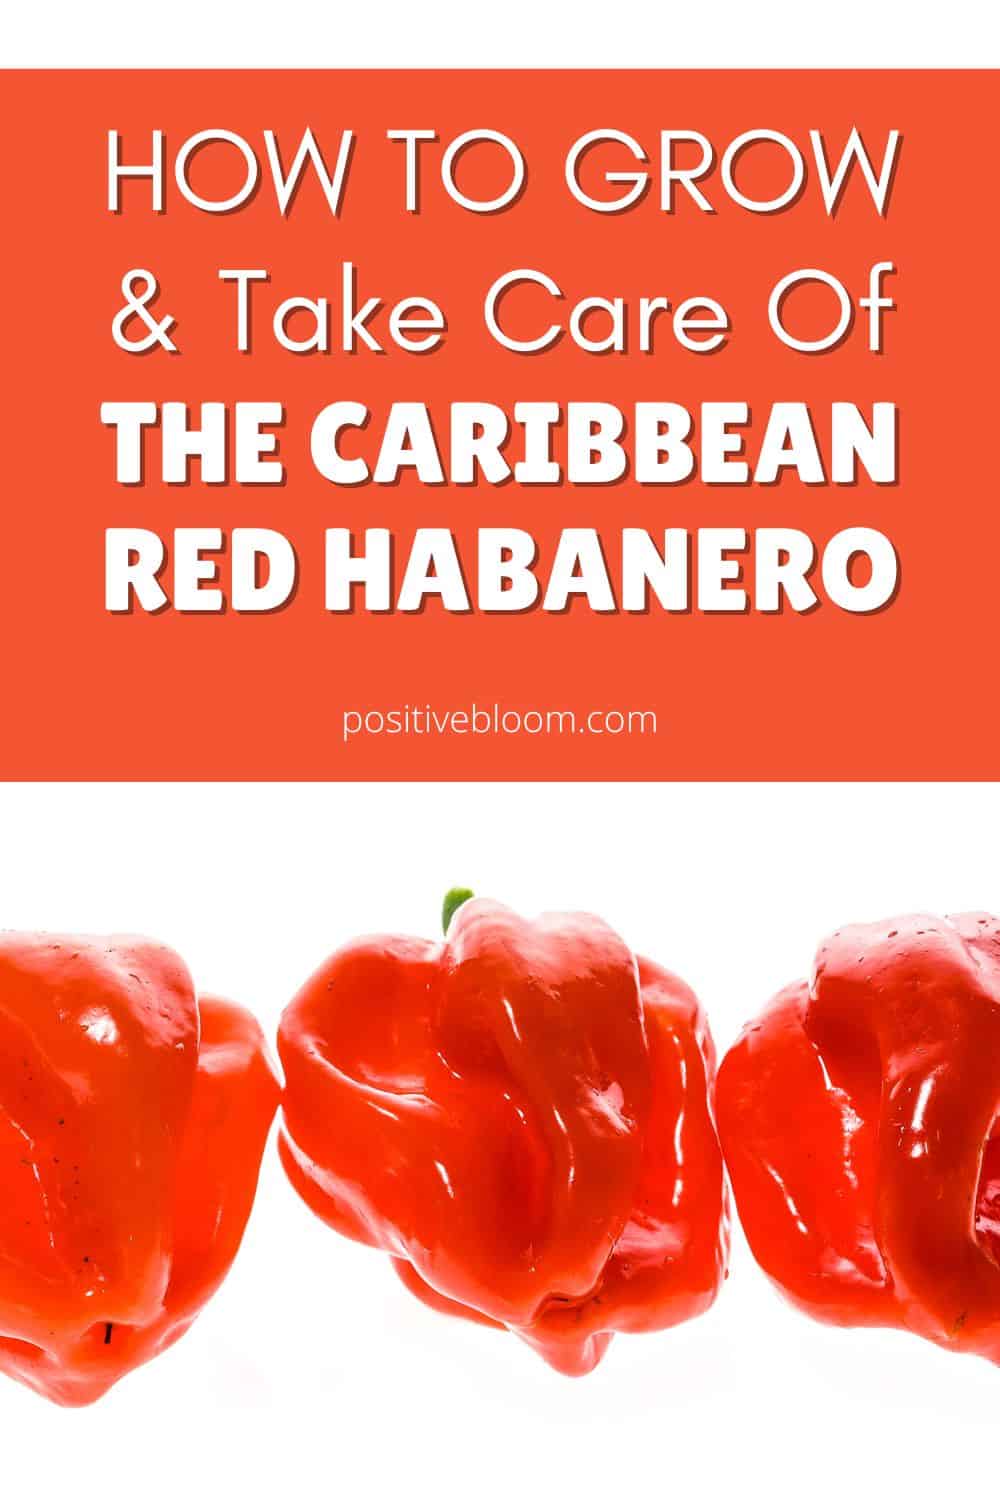 How To Grow & Take Care Of The Caribbean Red Habanero Pinterest